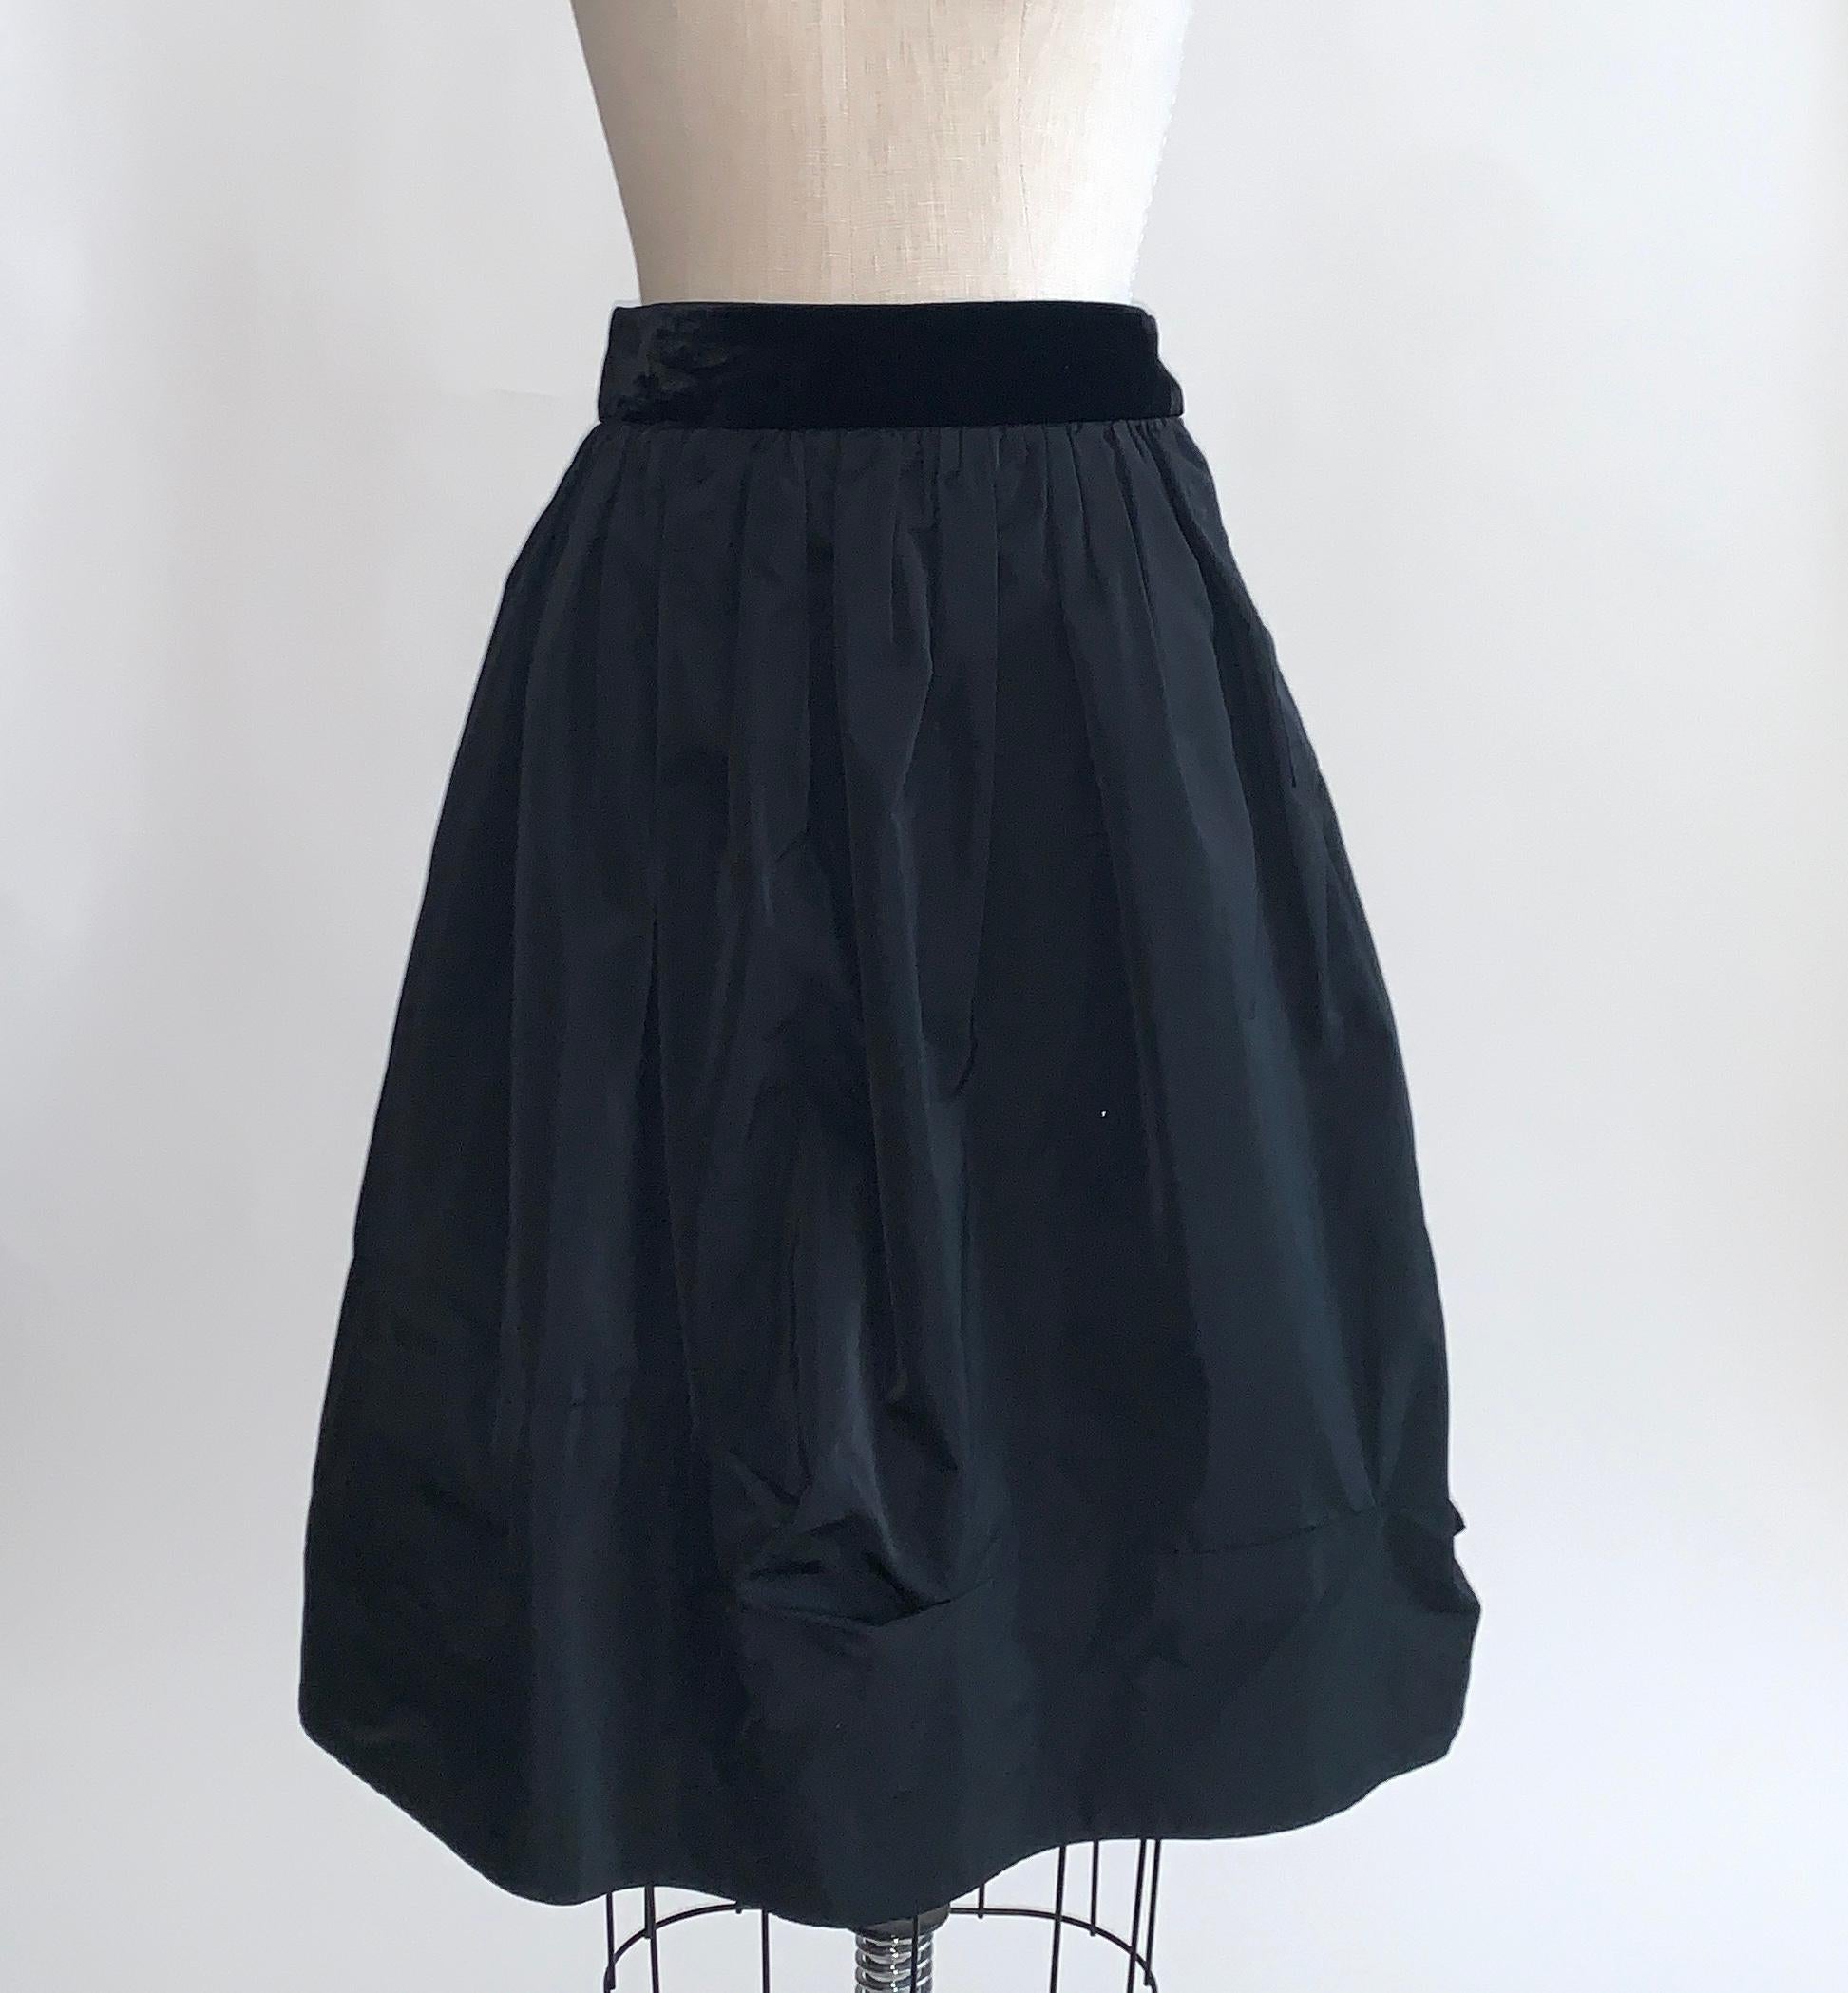 Louis Vuitton Black Bustier Tank and Skirt Set with Bow Detail at Shoulders For Sale 3